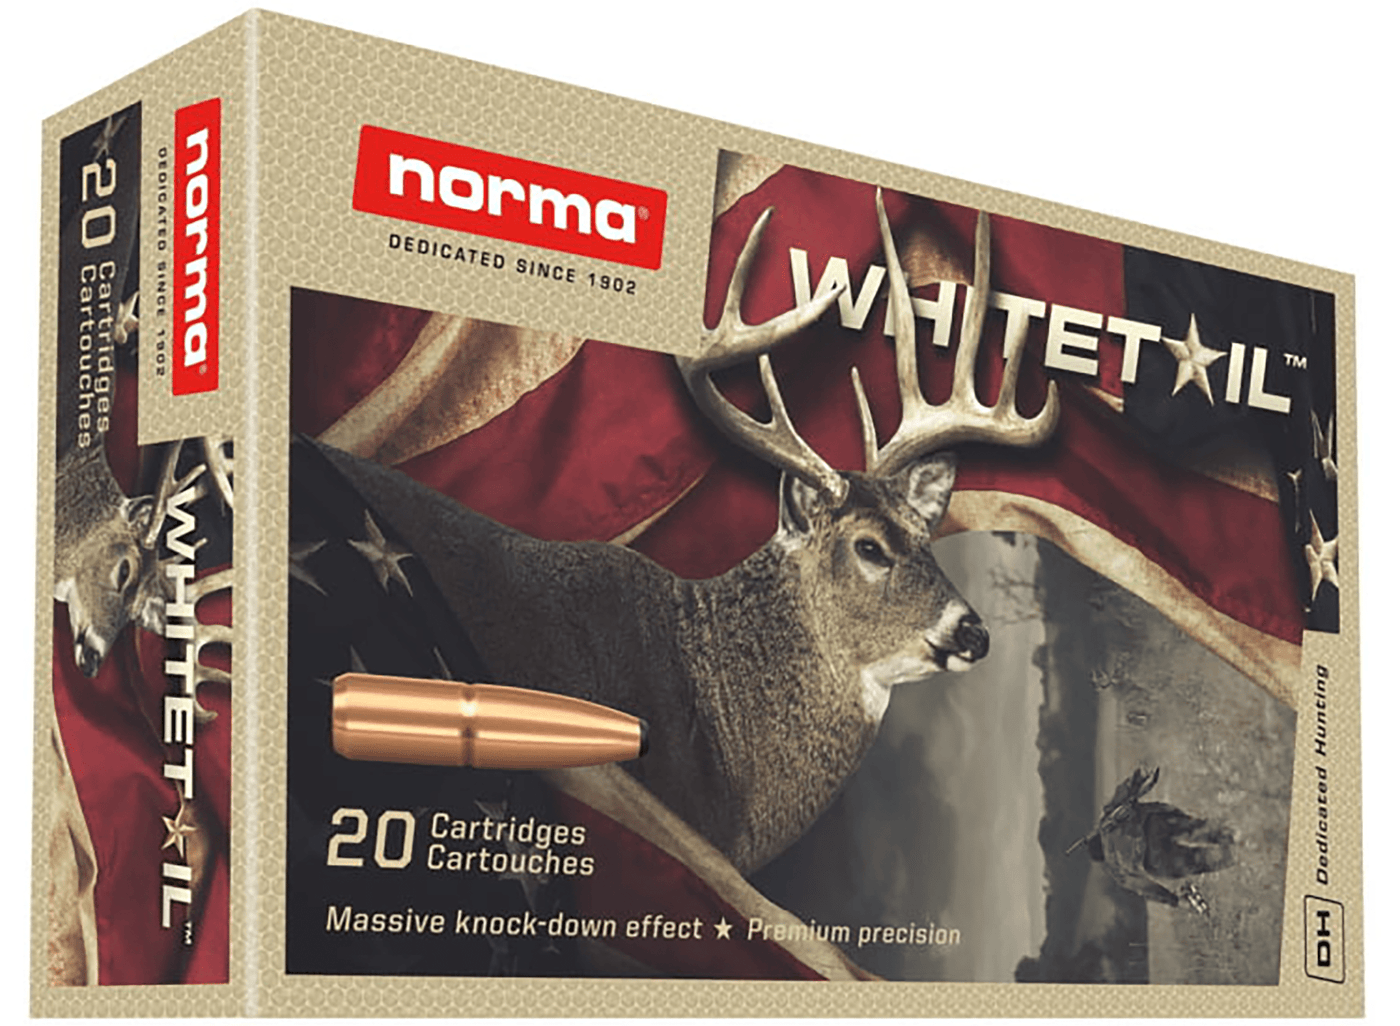 NORMA AMMUNITION (RUAG) Norma Ammunition (ruag) Whitetail, Norma 20171502 7mm-08rem 150gr Psp Whitetail 20/10 Ammo